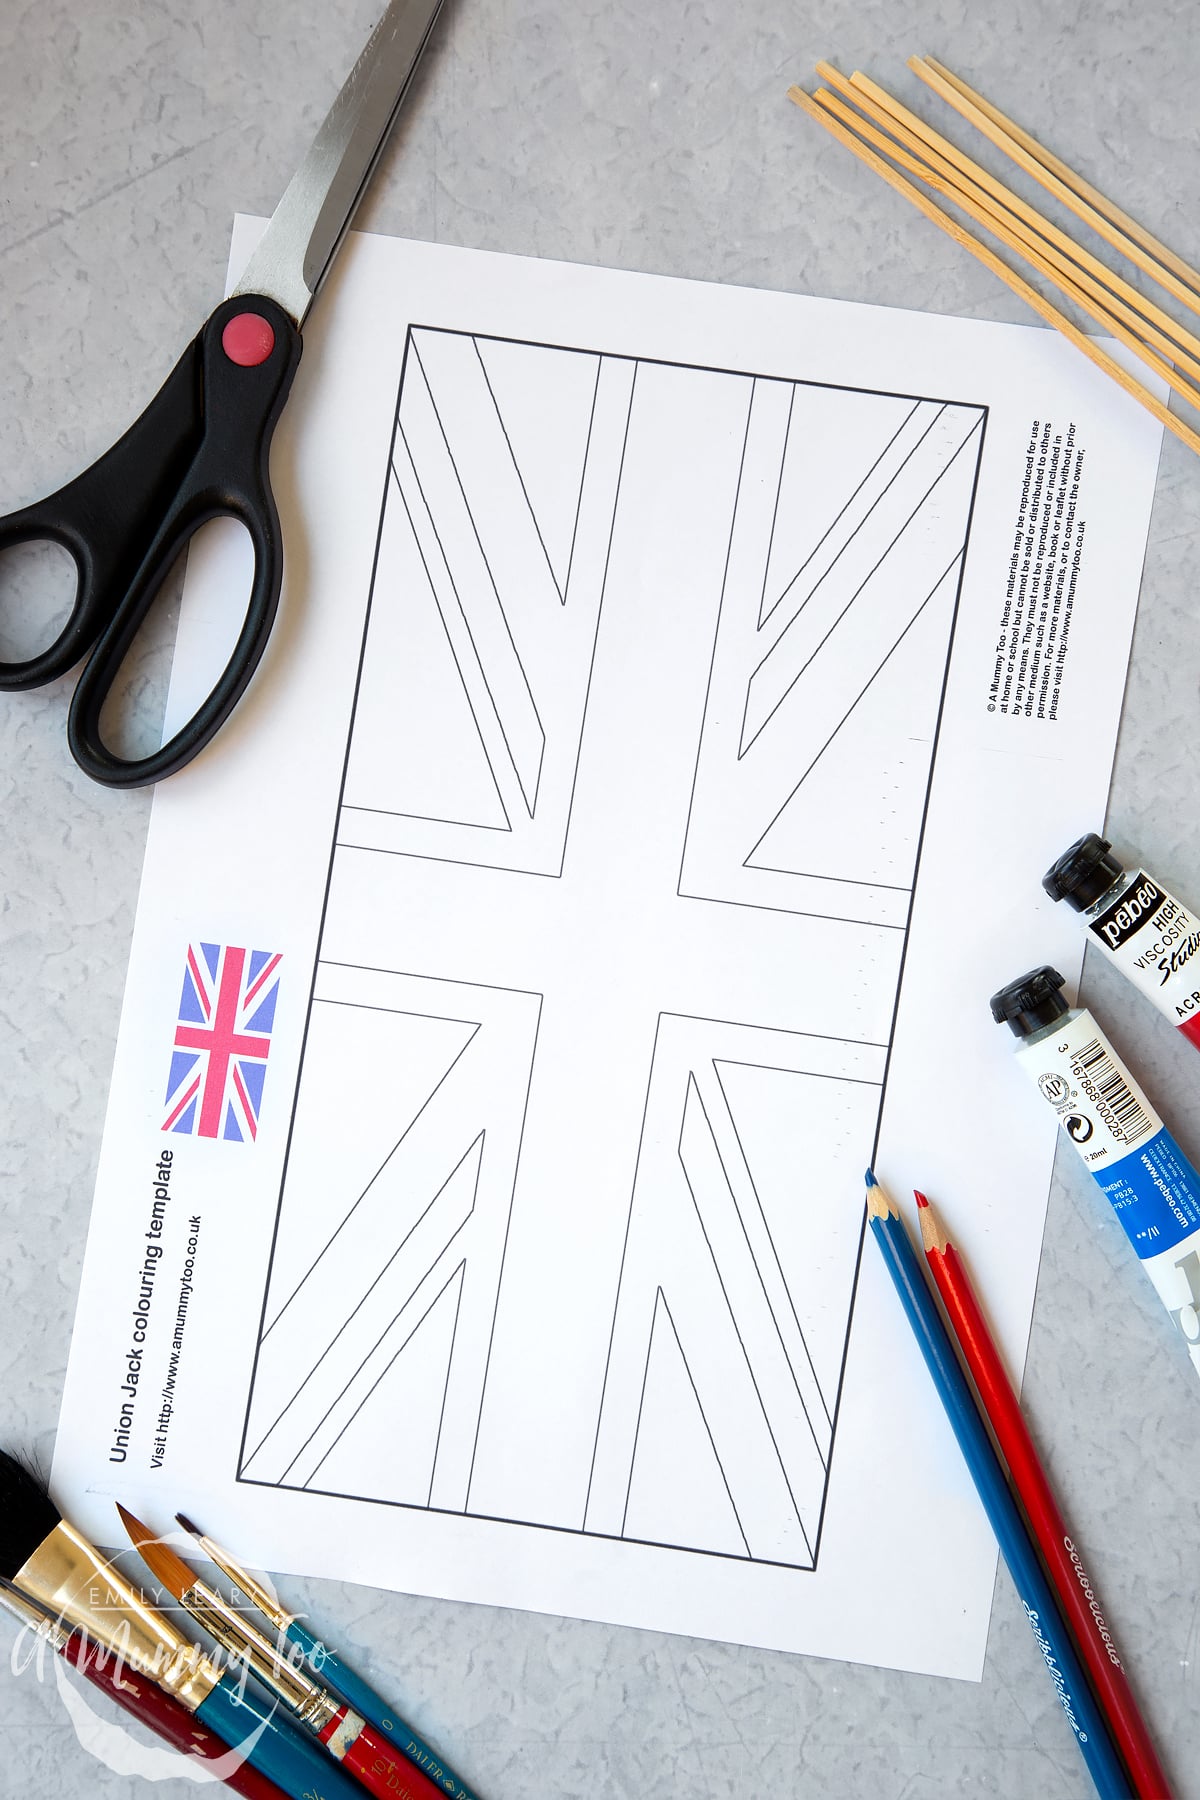 union jack flag printed onto A4 paper with scissors, glue and wooden sticks around the edges.